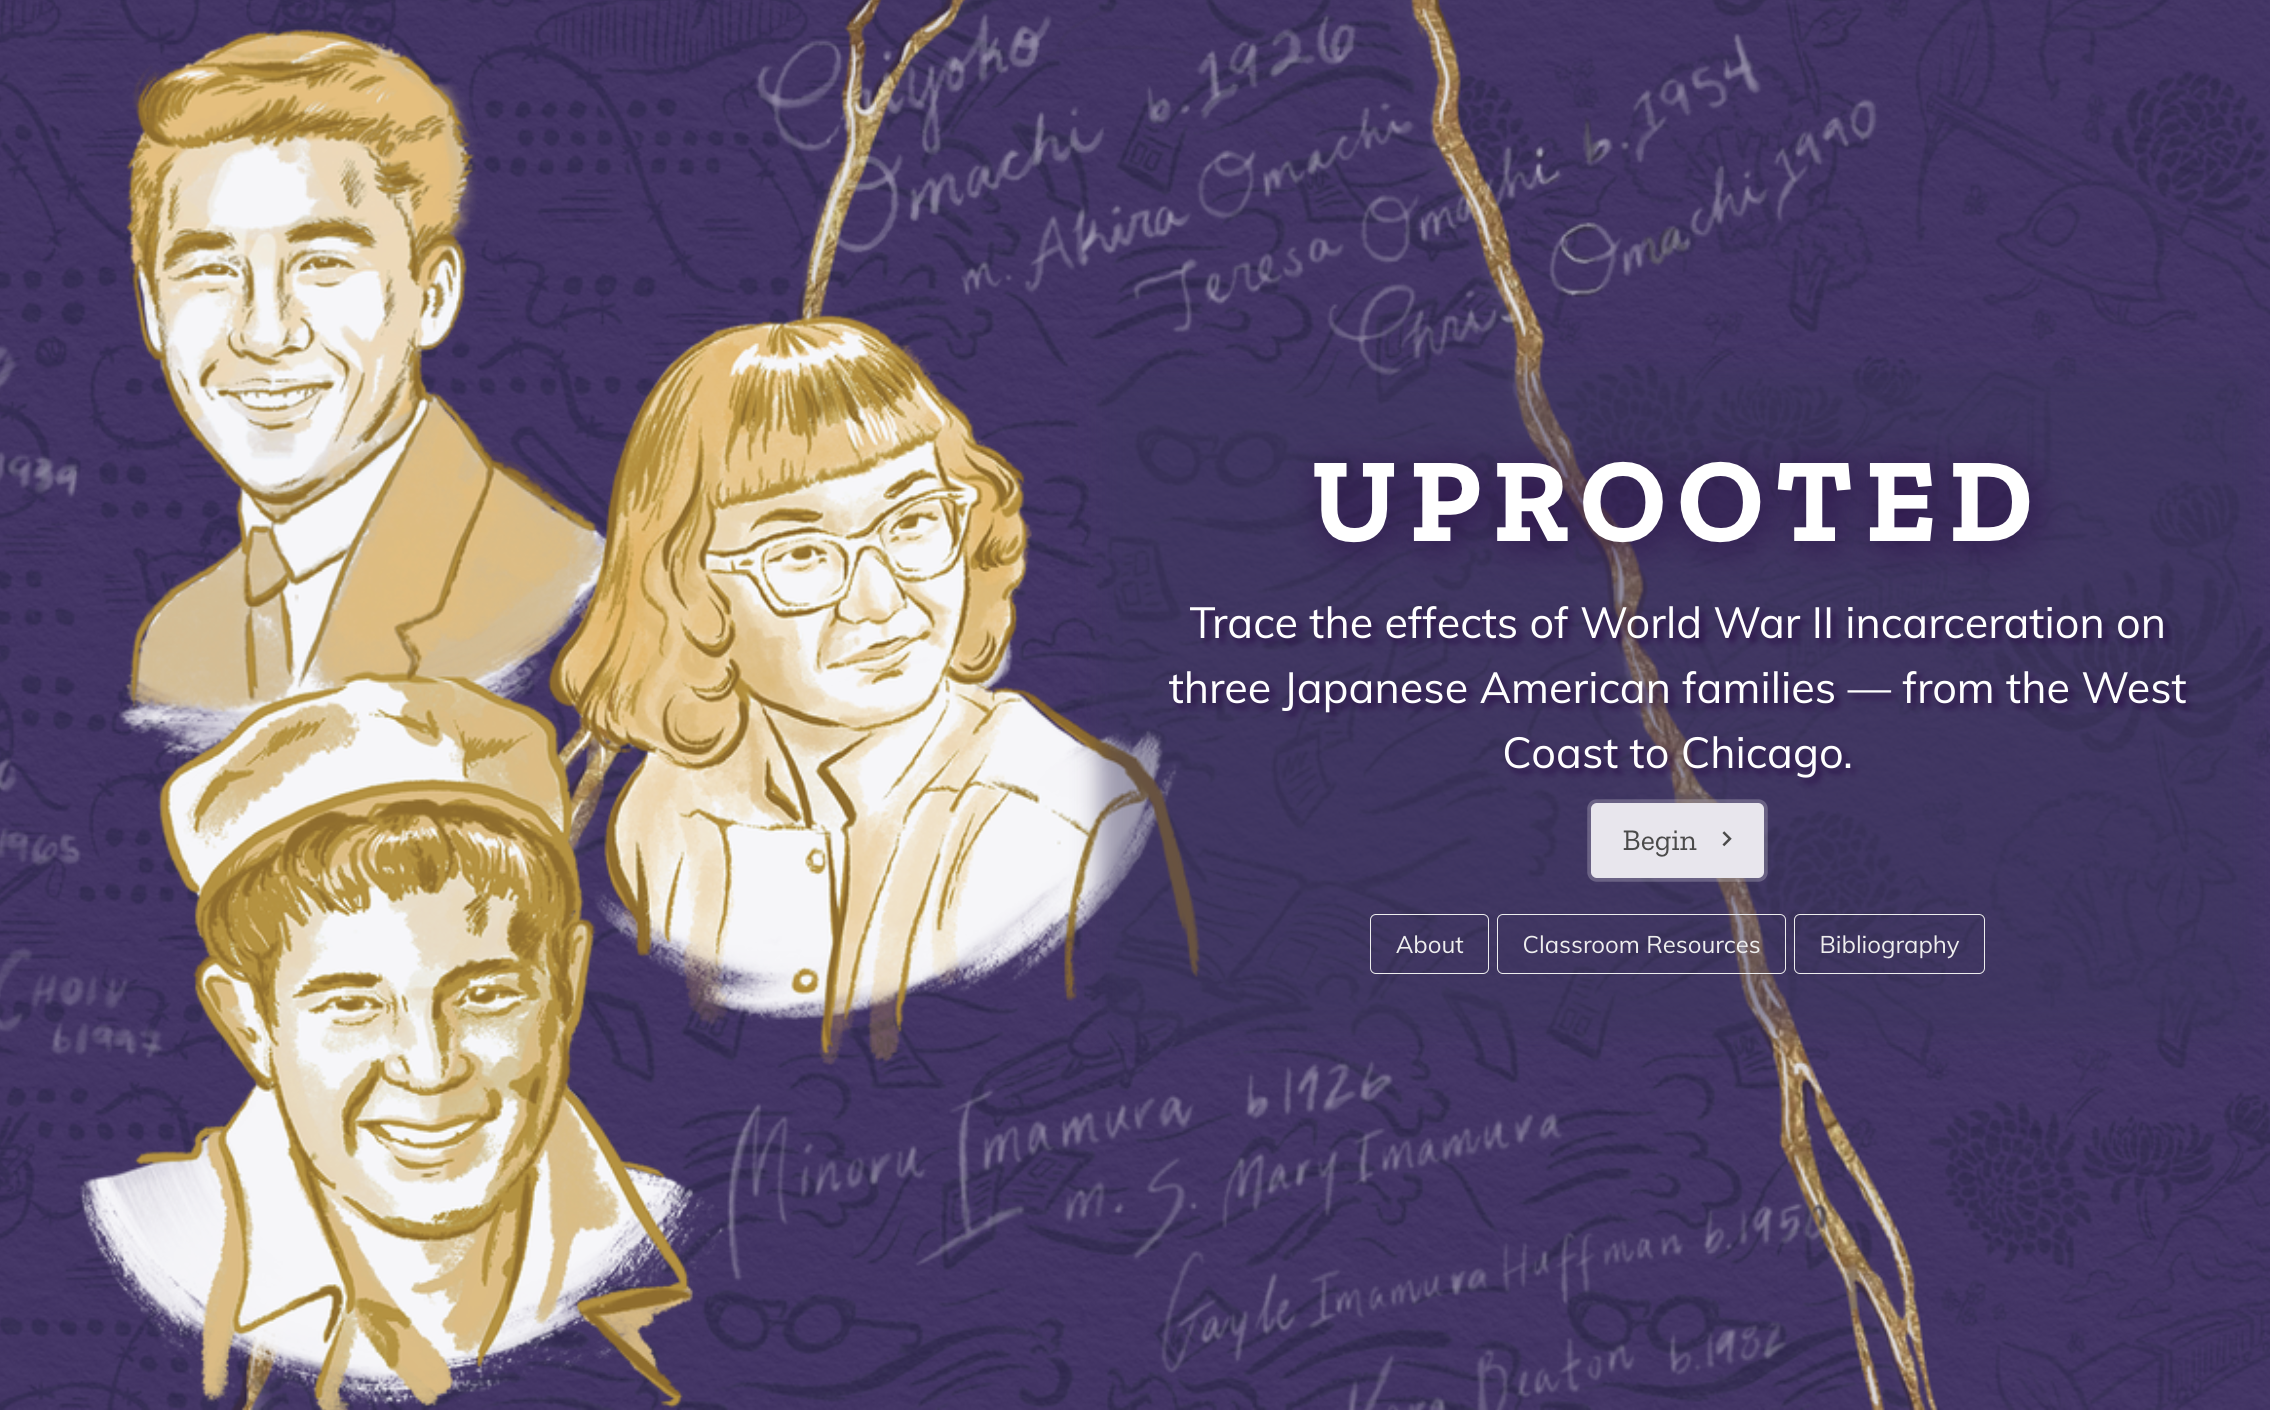 Uprooted: Effects of WWII incarceration on Japanese American Families